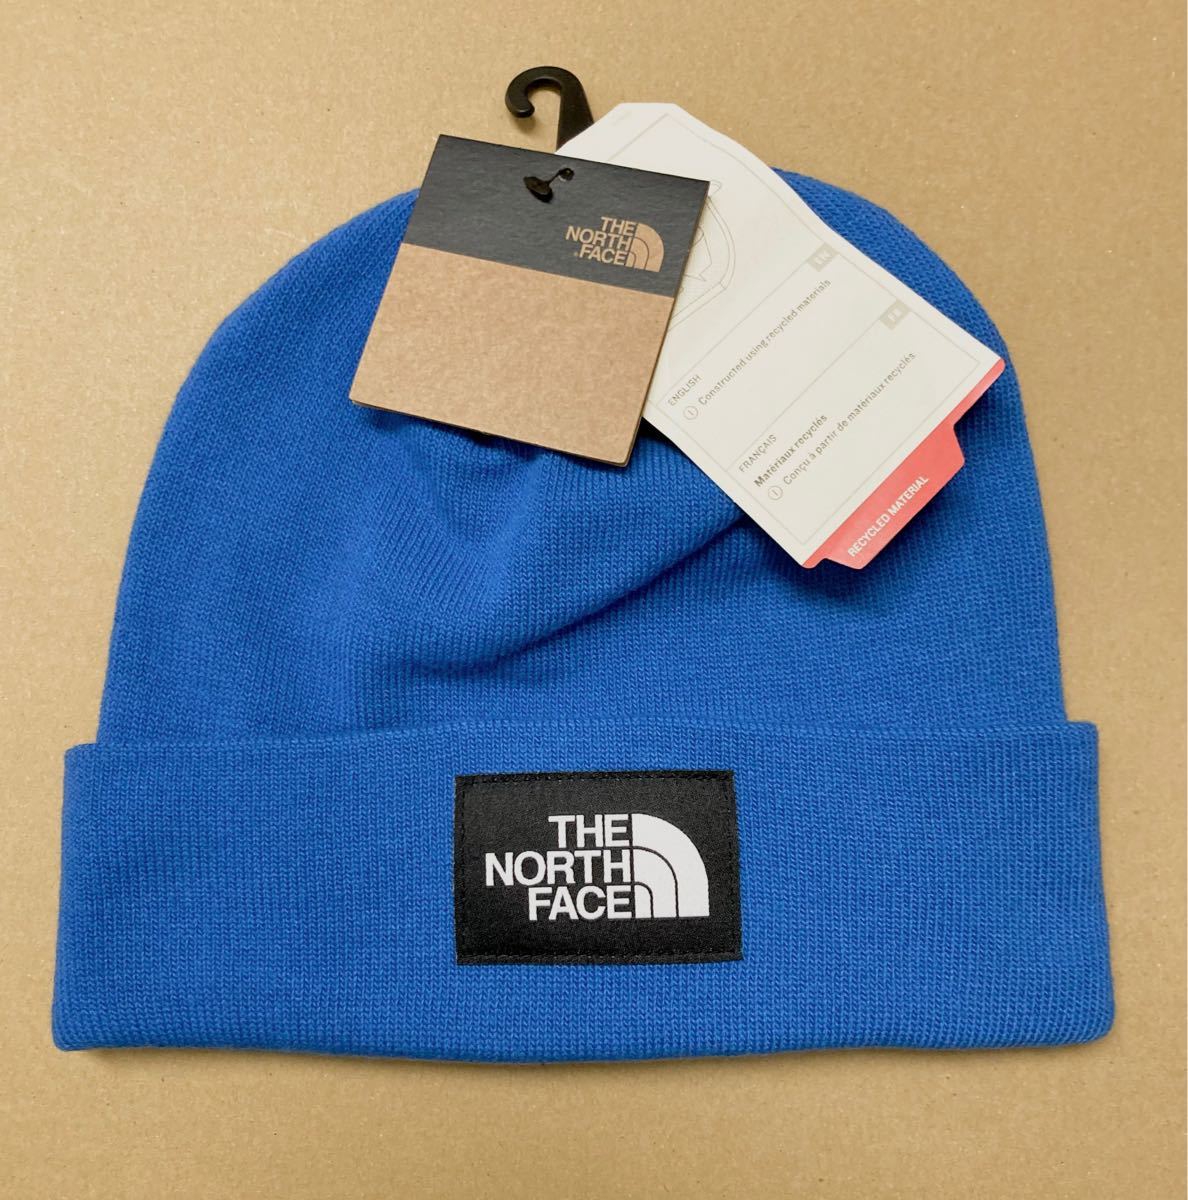 THE NORTH FACE DOCK WORKER RECYCLED BEANIE  ニットキャップ